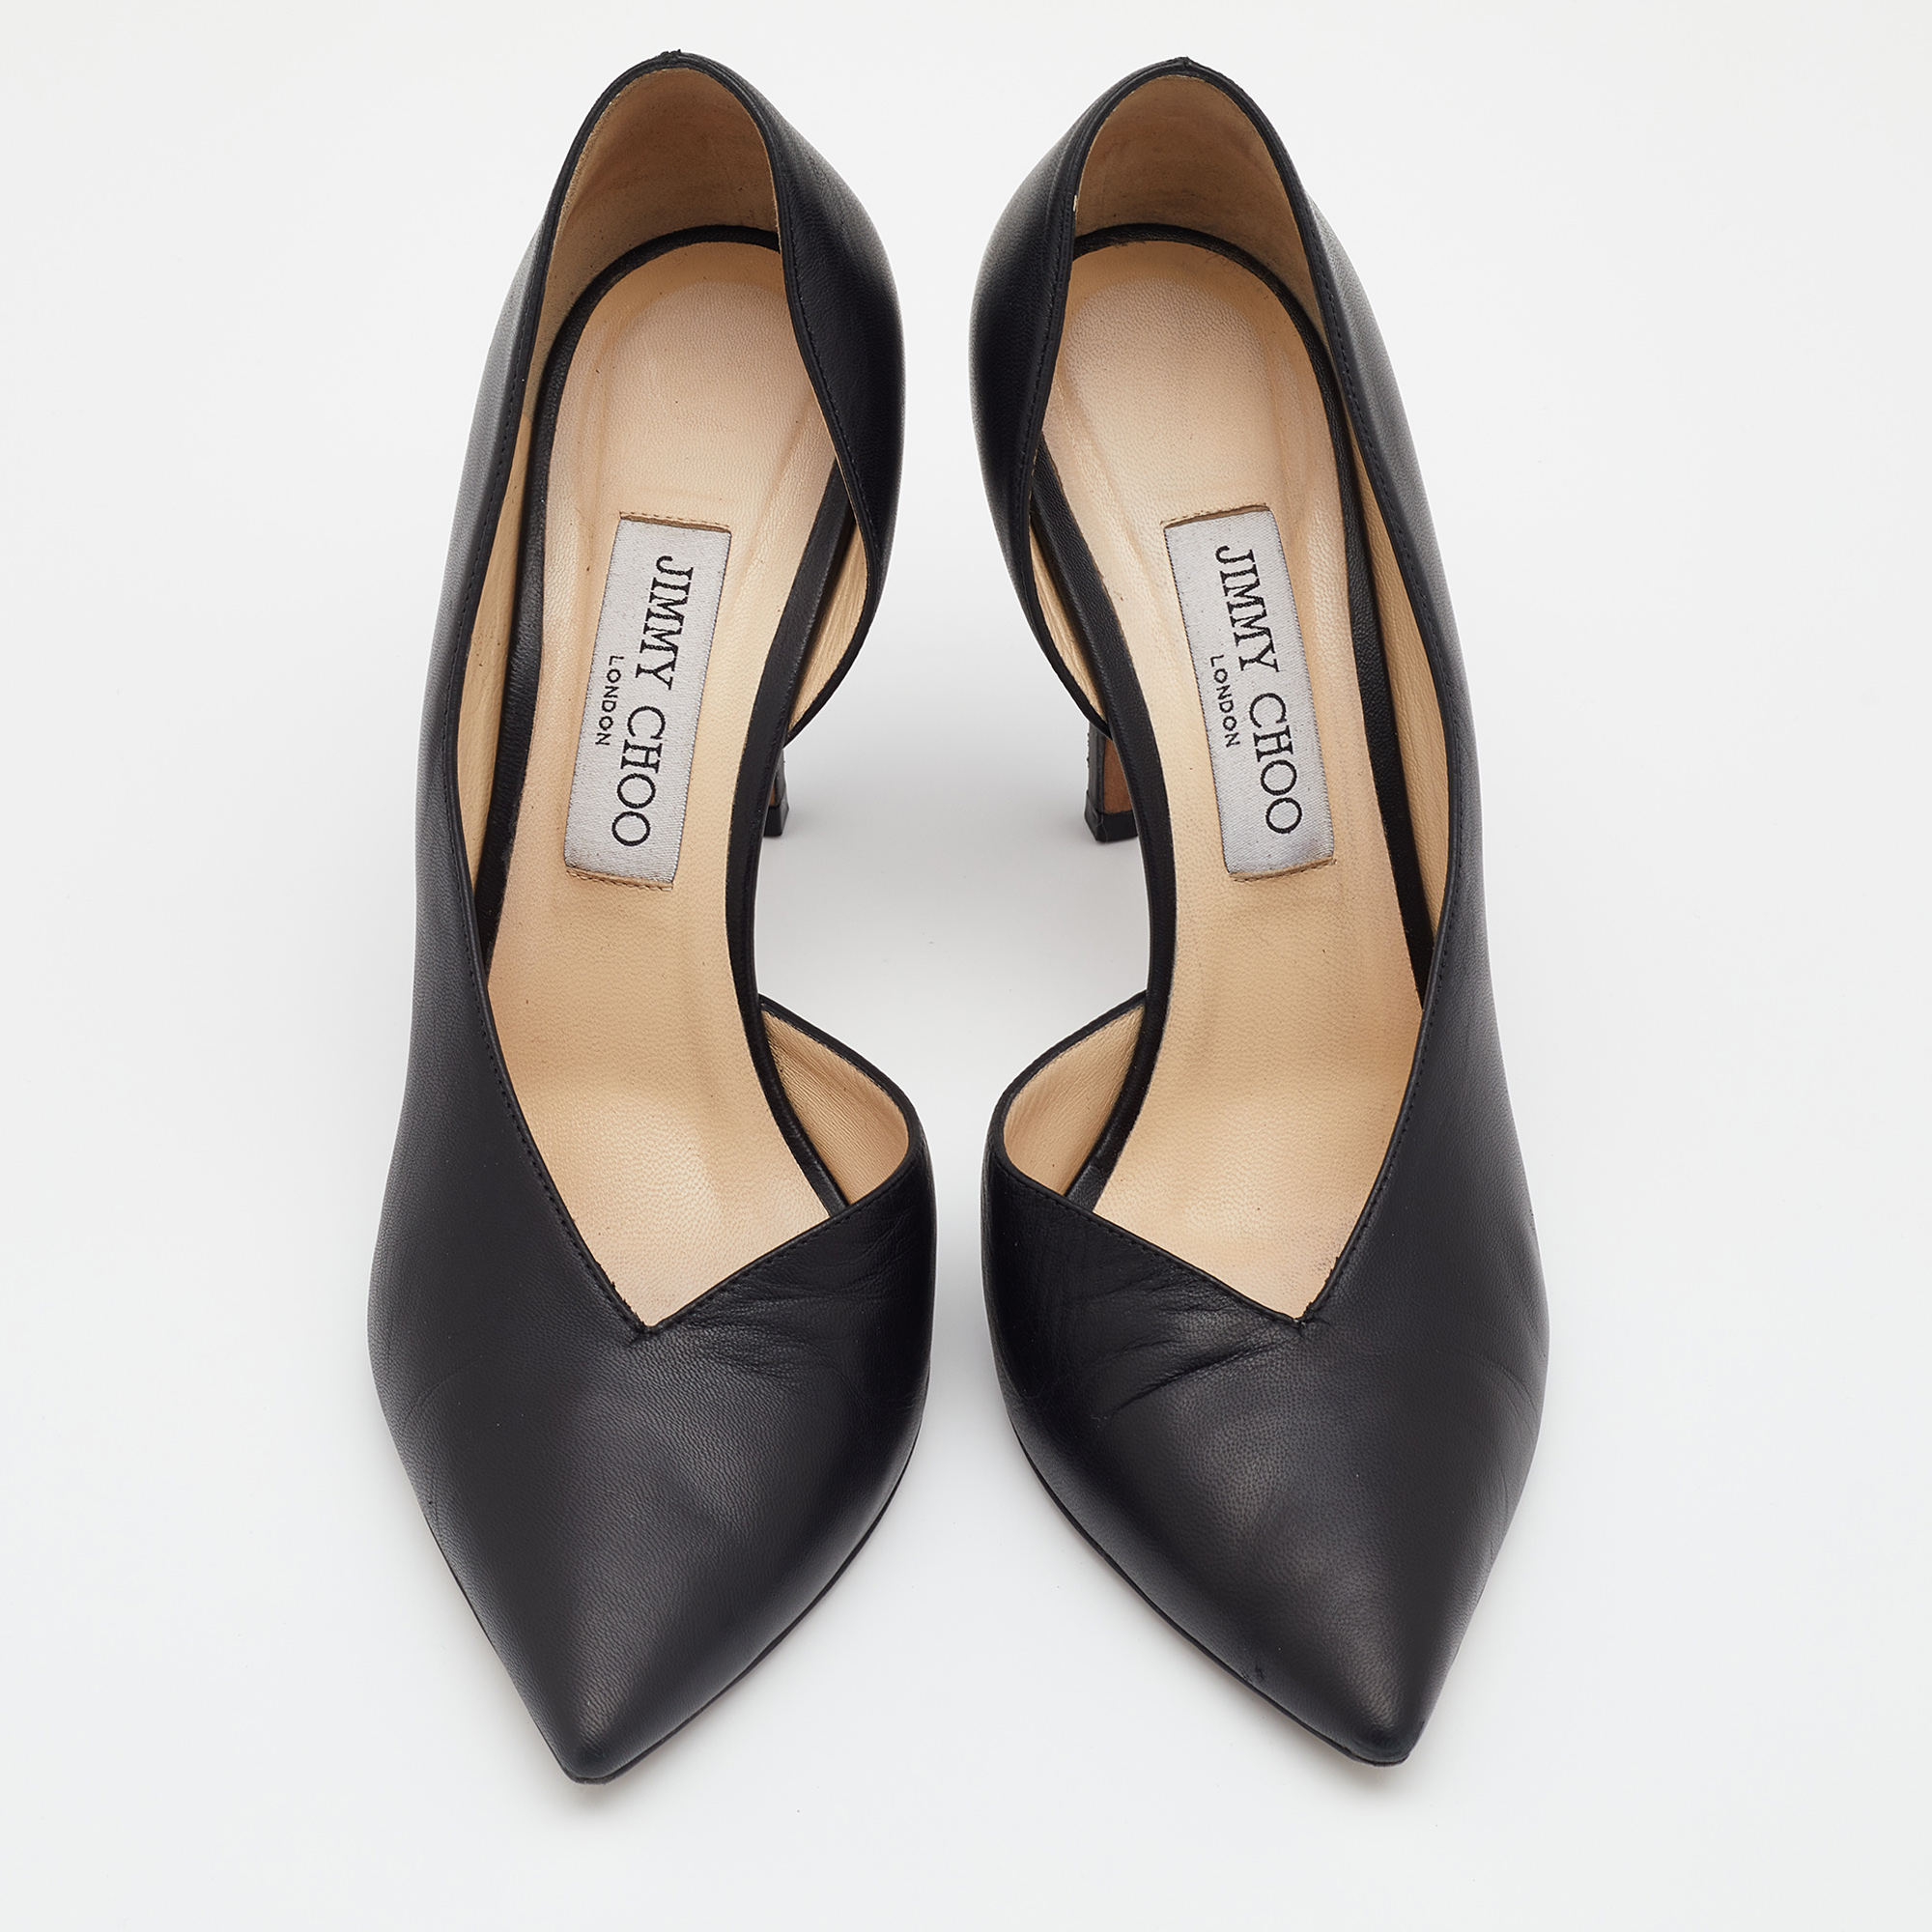 Jimmy Choo Black Leather Pointed Toe D'orsay Pumps Size 39.5